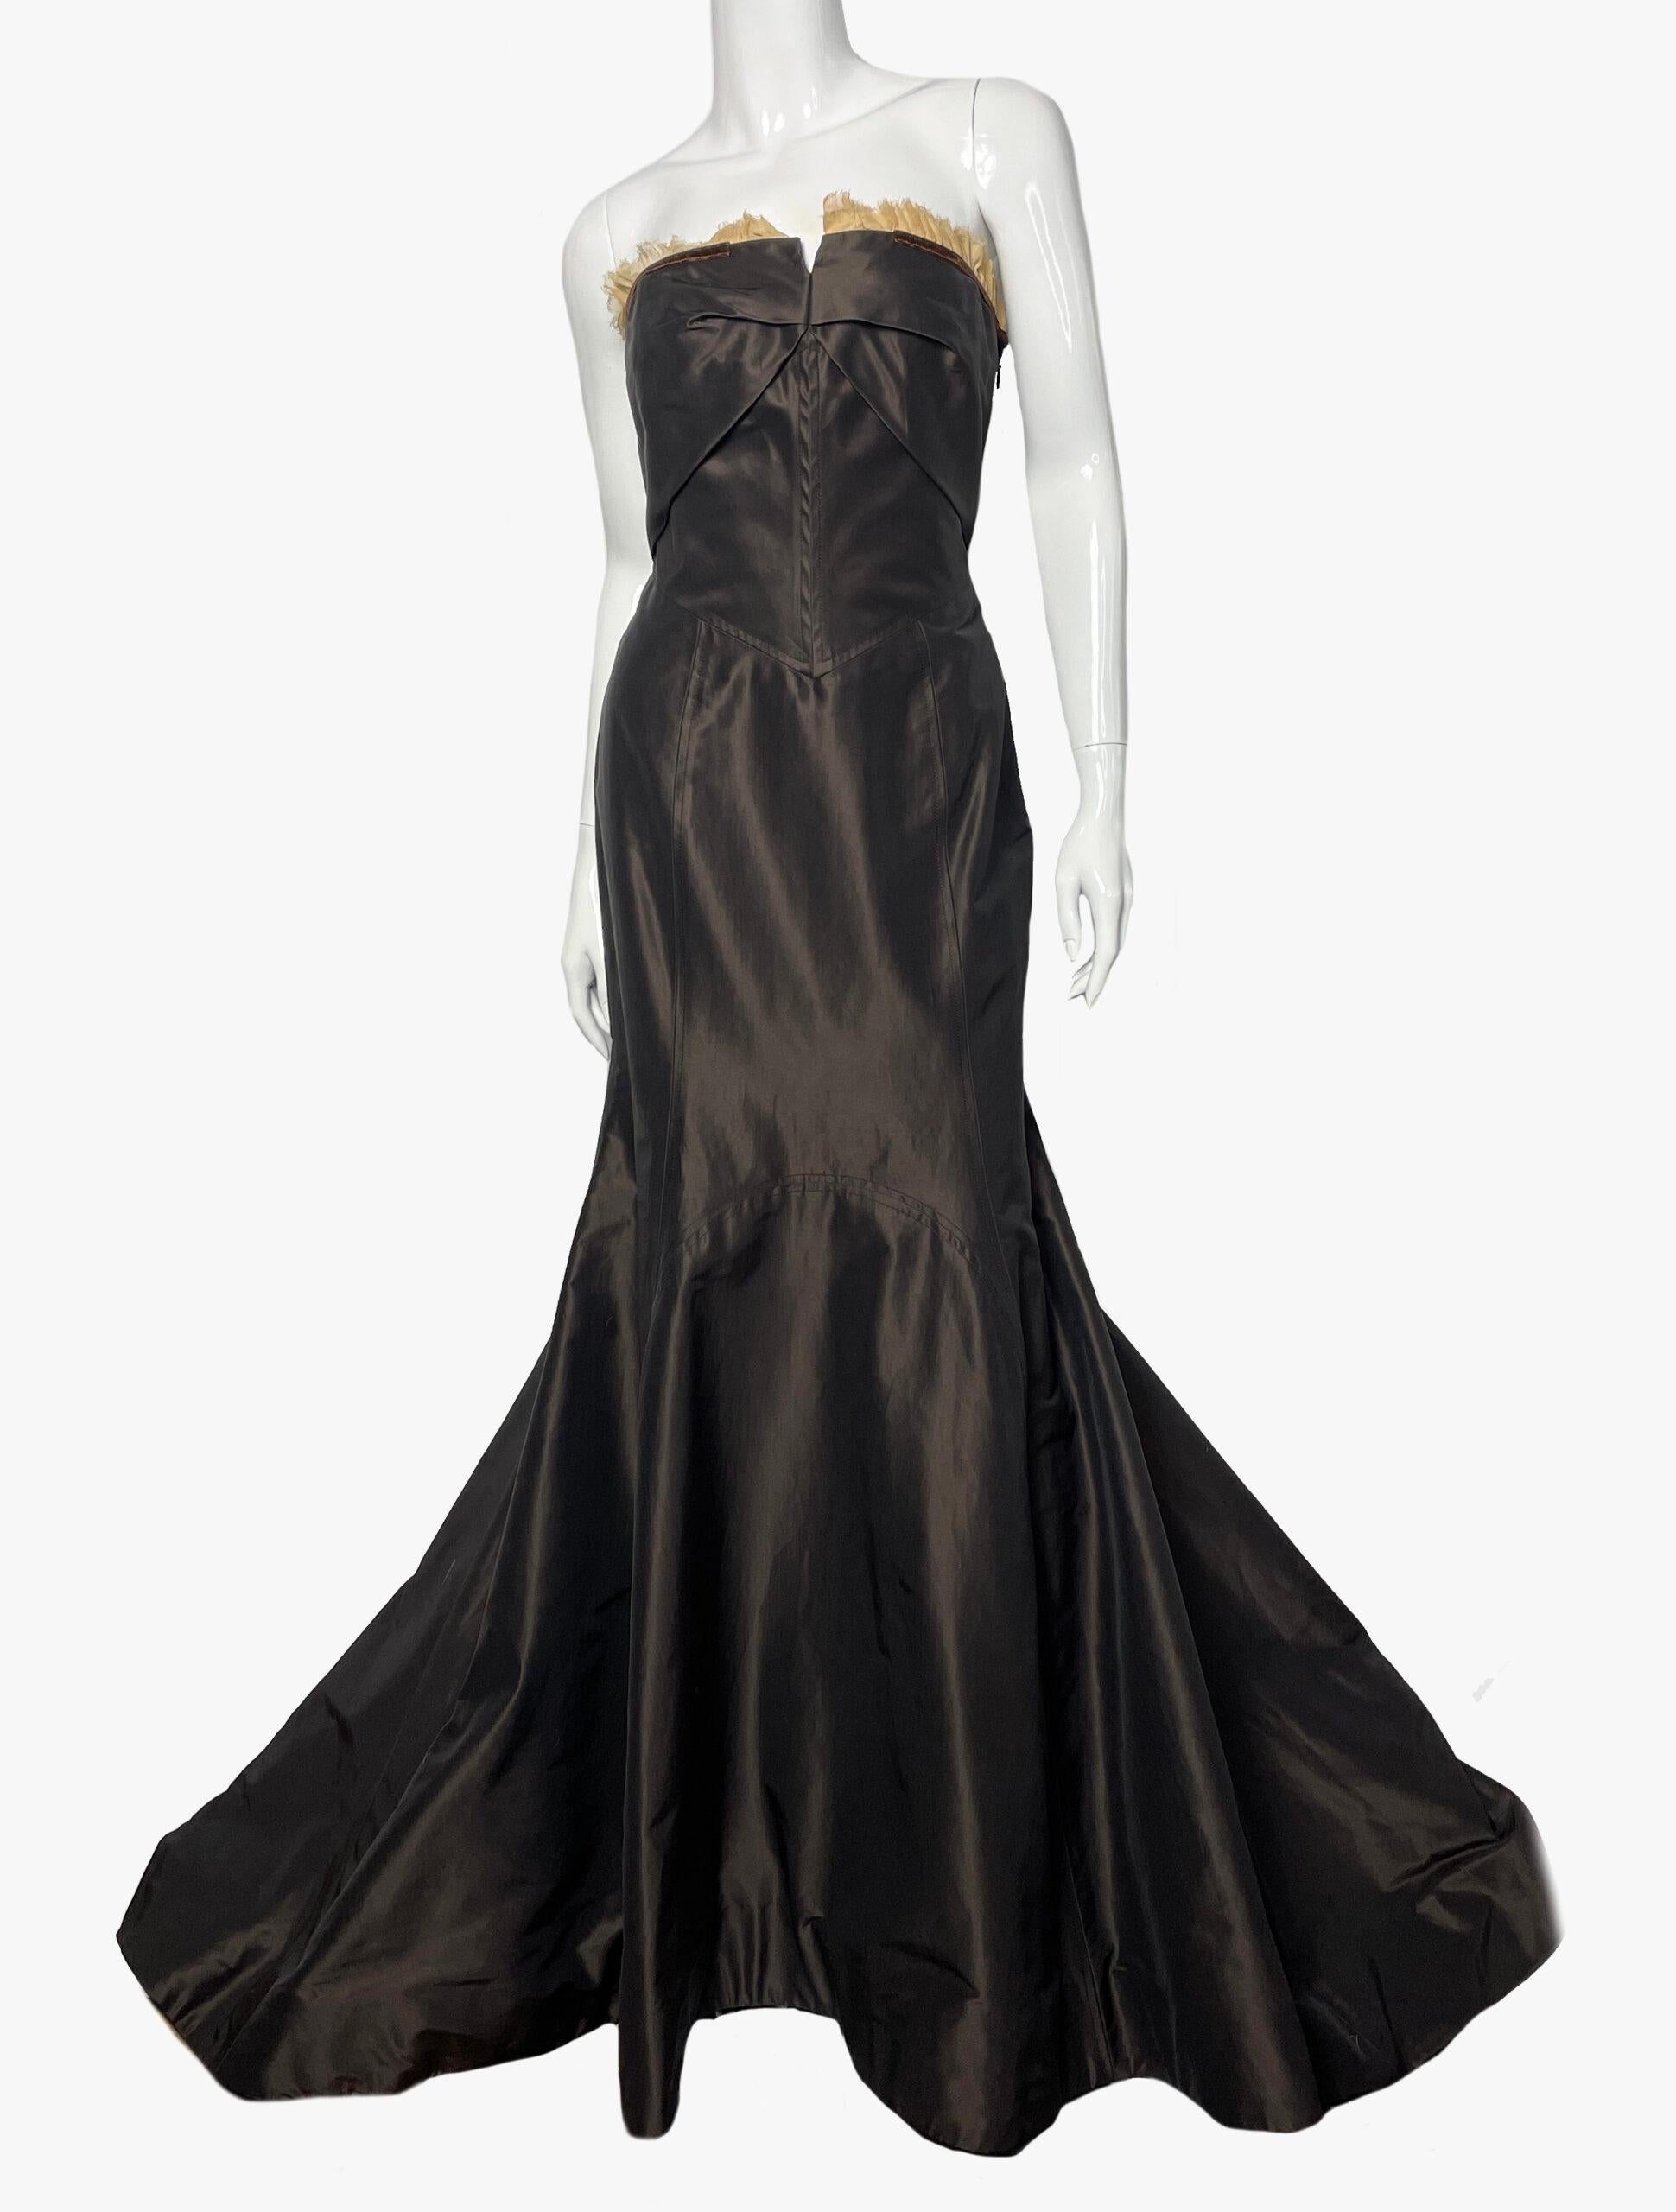 Carolina Herrera vintage evening maxi dress, with corset and tulle trim.
Fabric: 75% cotton, 25% silk, Lining – 100% silk
Size: M/US6
Measurements:
Bust: 82-83 cm / 32”
Waist: 61 cm / 24”
Hips- free
Length in front: 135 cm / 53”
Length in